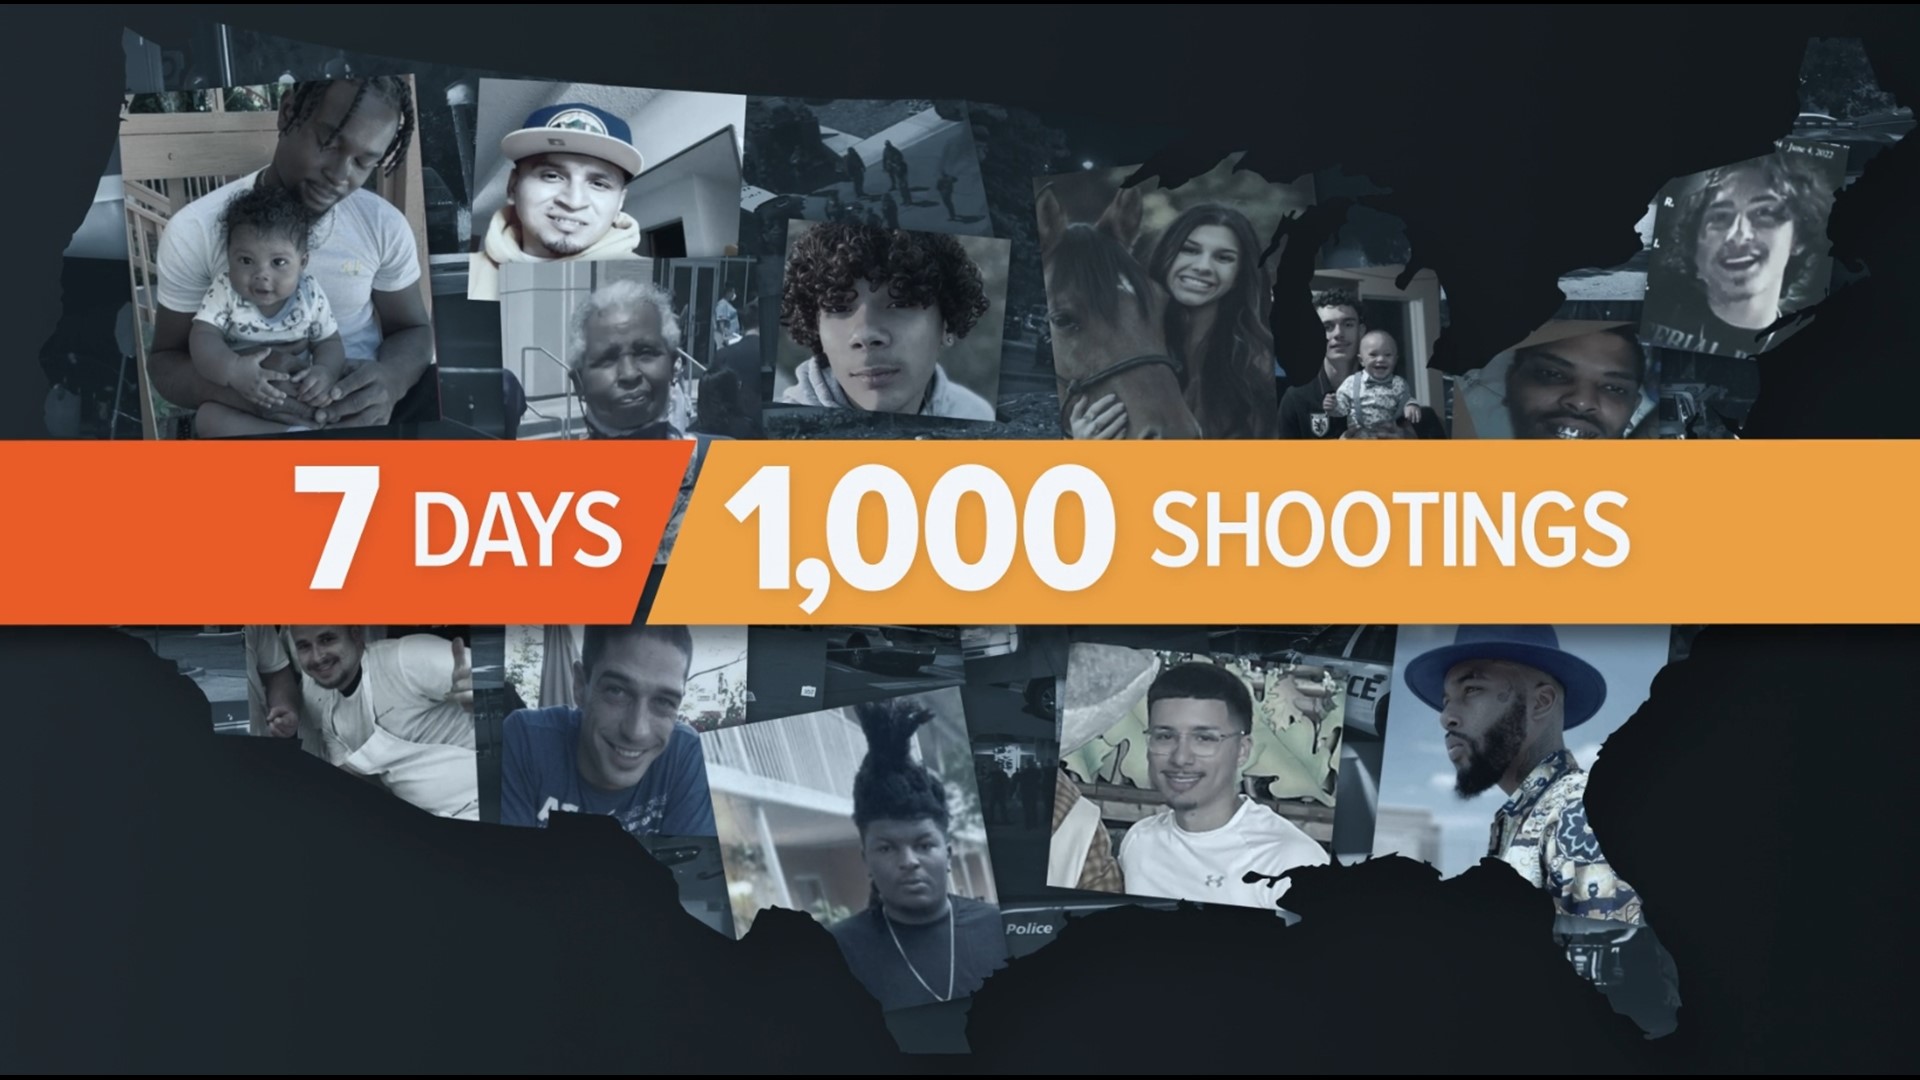 Ahead of National Gun Violence Awareness Day, TEGNA stations across the country, including WCNC Charlotte, spent months investigating a single week of shootings.